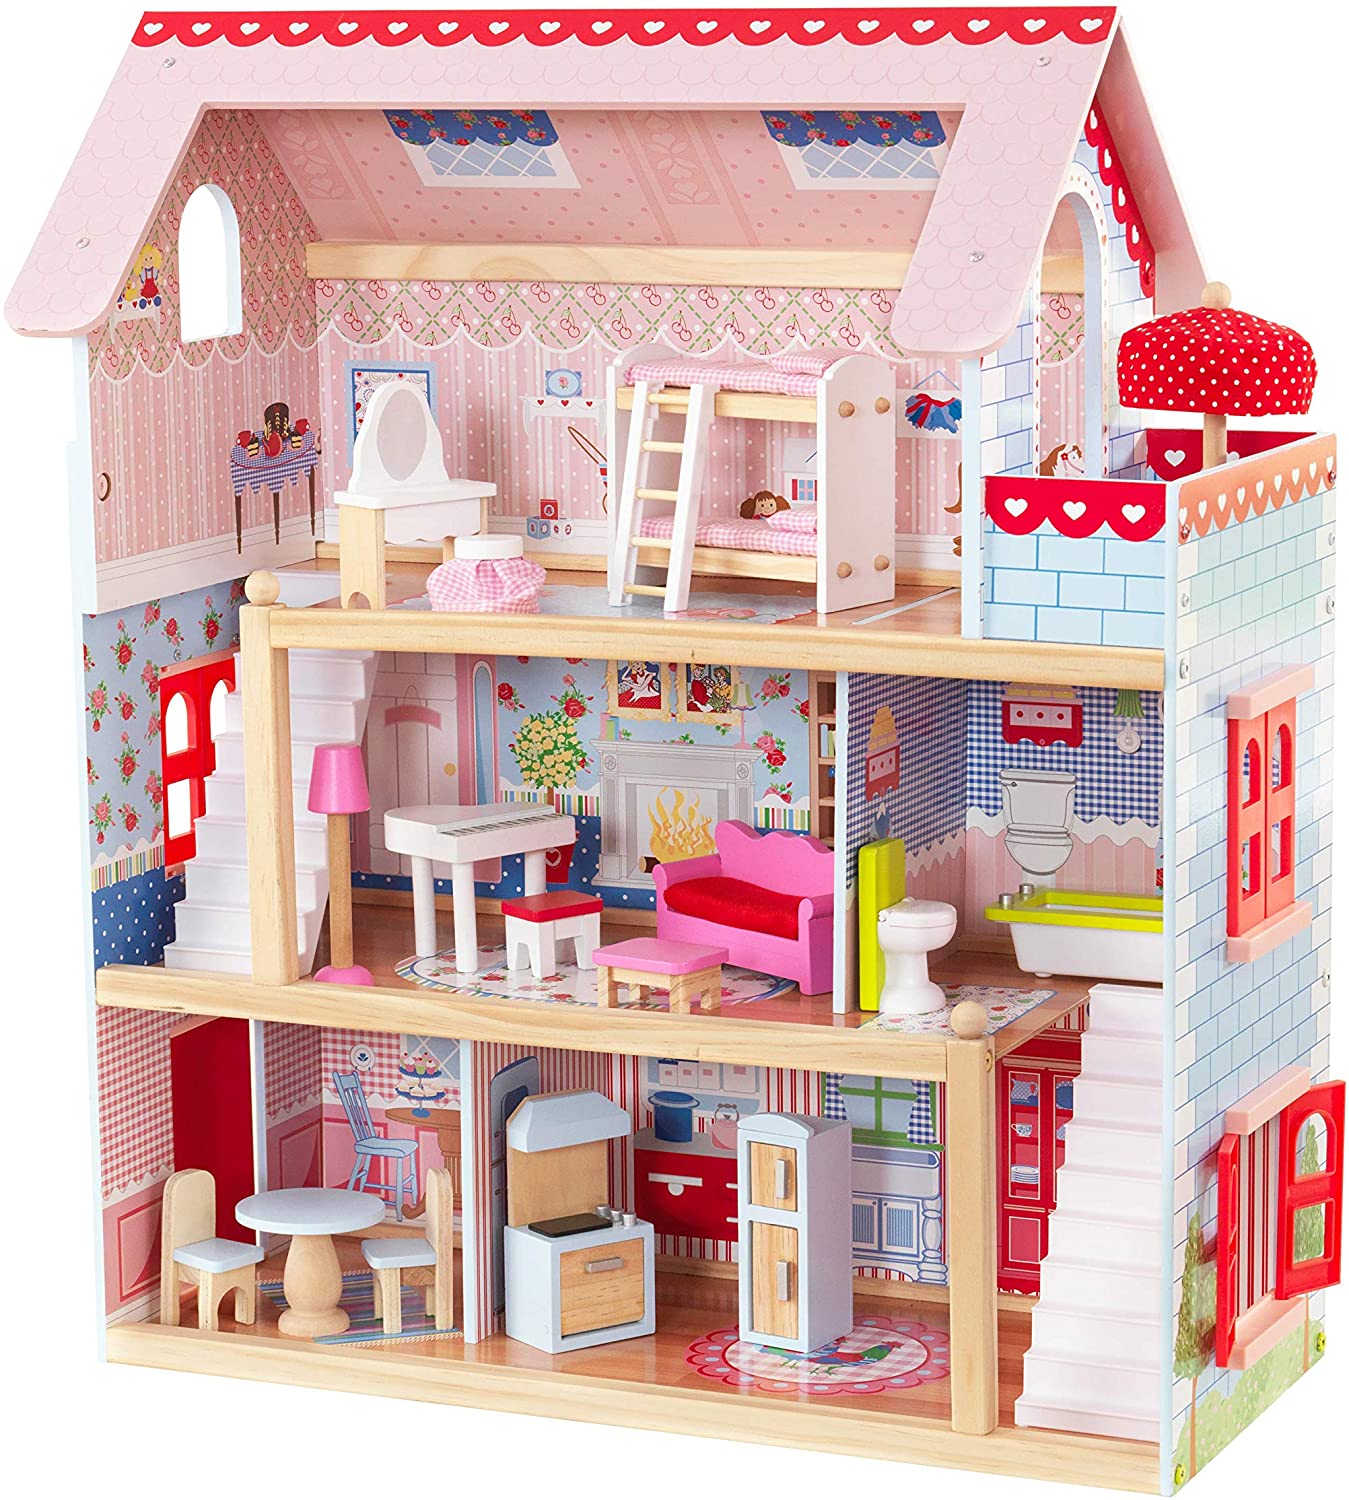 doll houses under 100